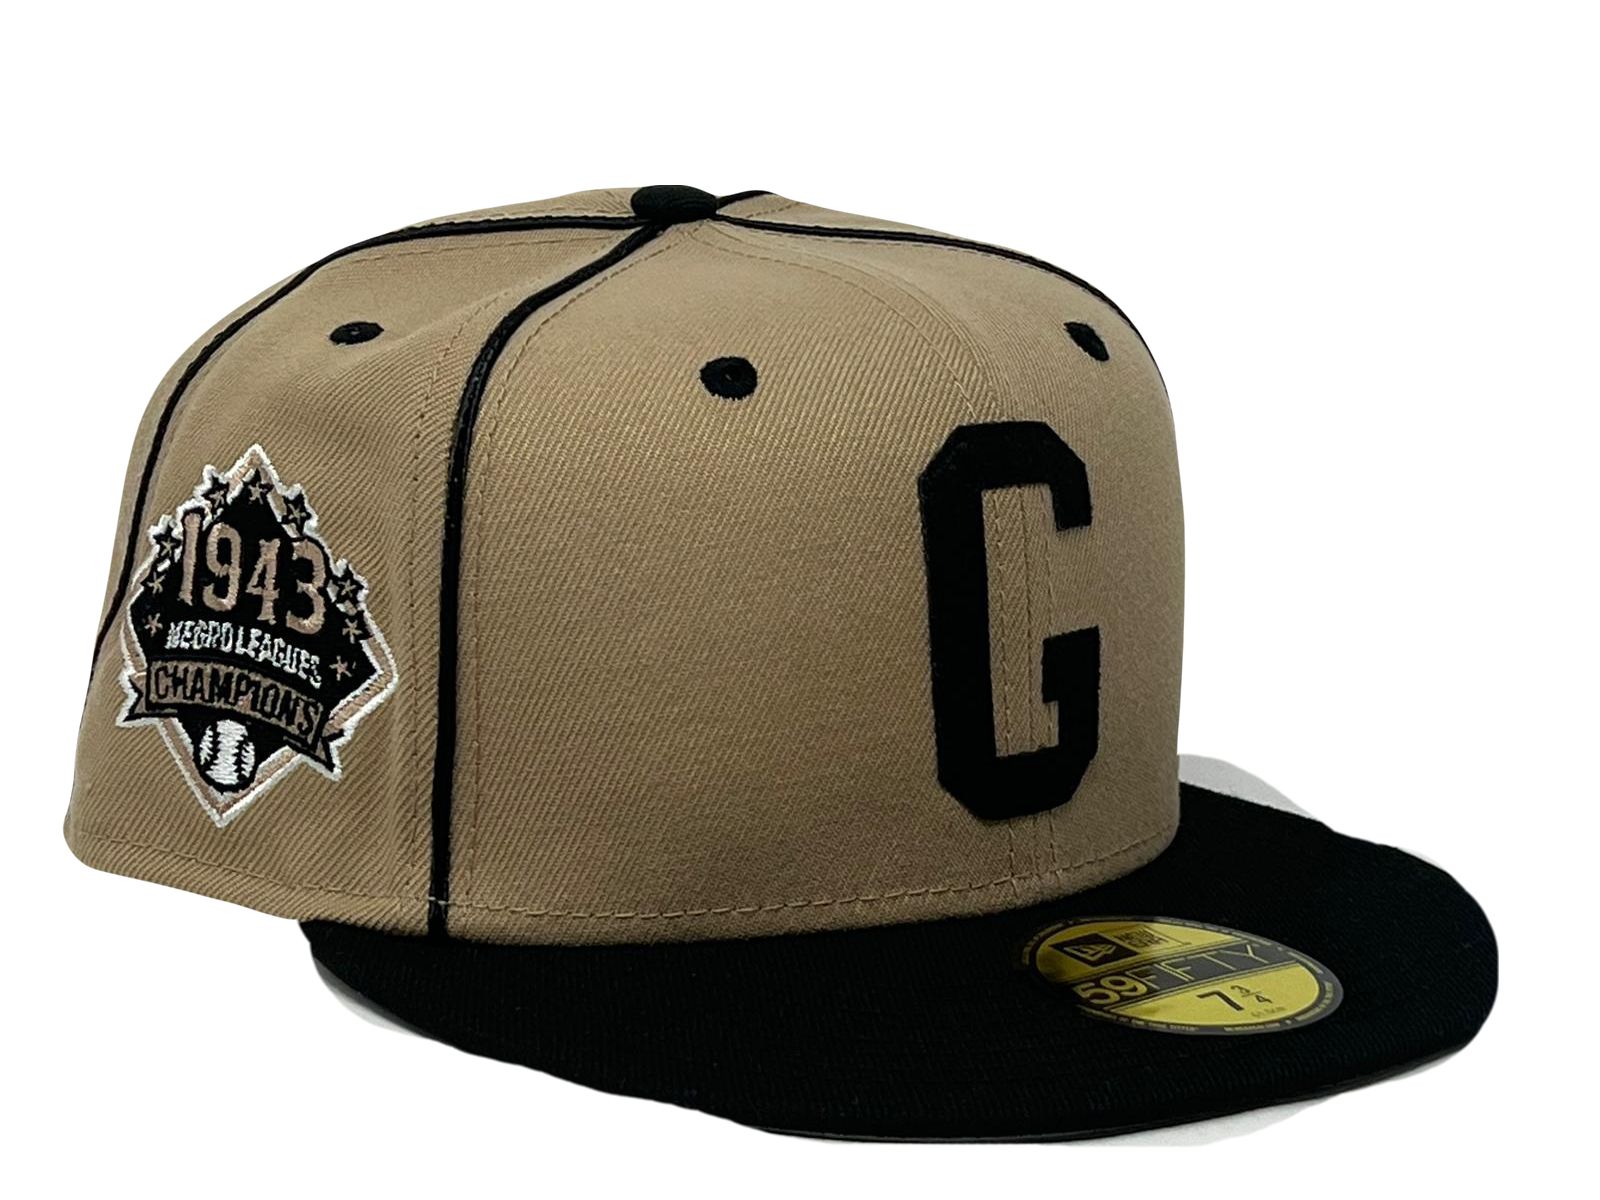 Rings & Crwns Homestead Grays Navy Team Fitted Hat